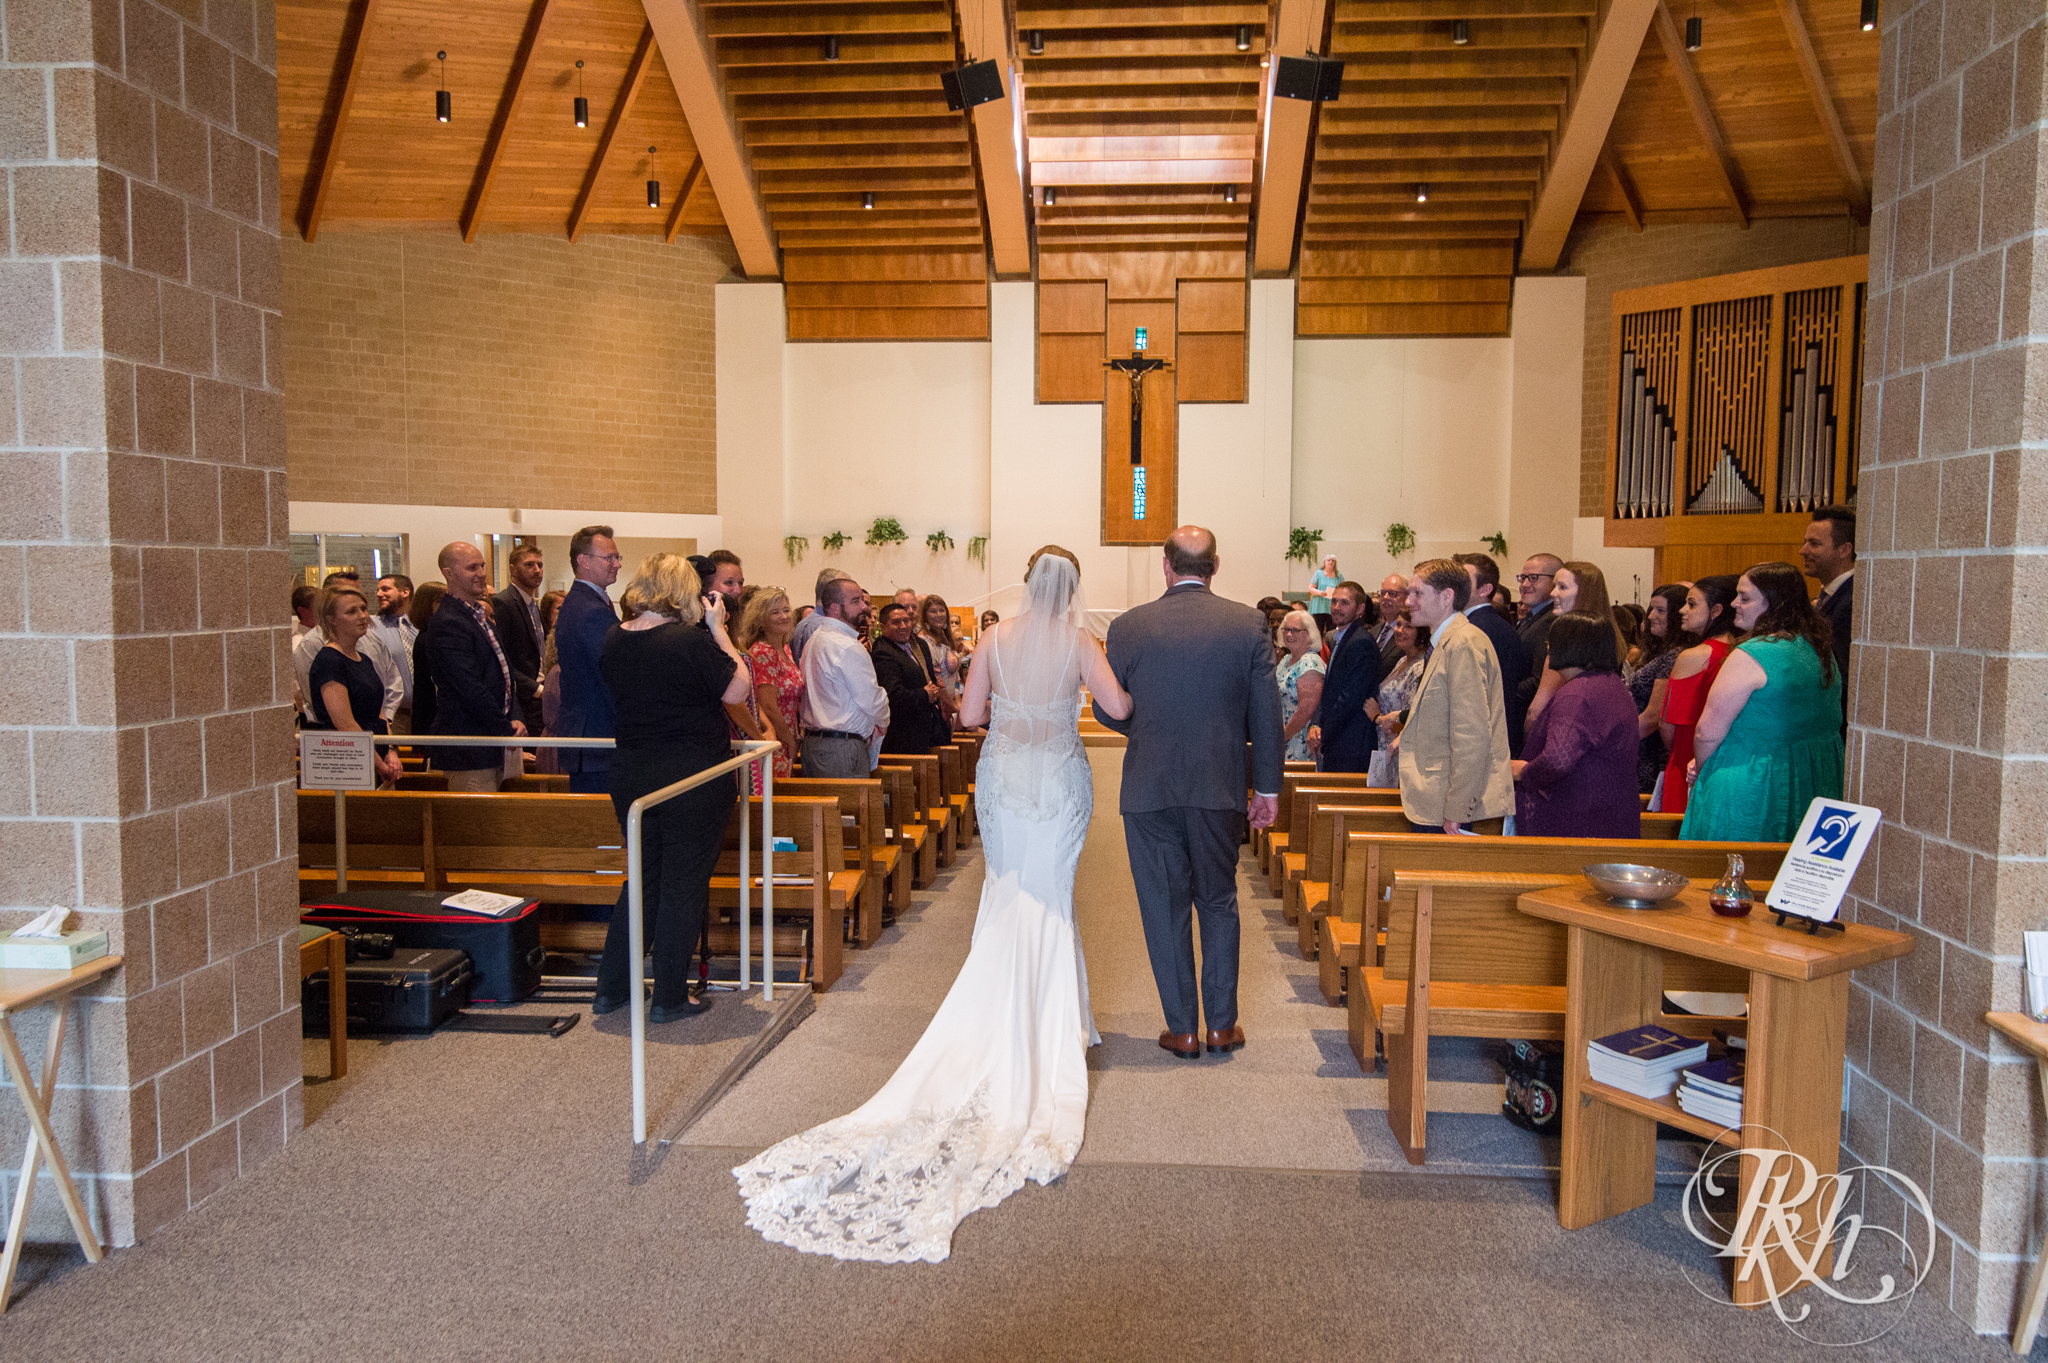 Black walks down the aisle during wedding ceremony at church in Richfield, Minnesota.